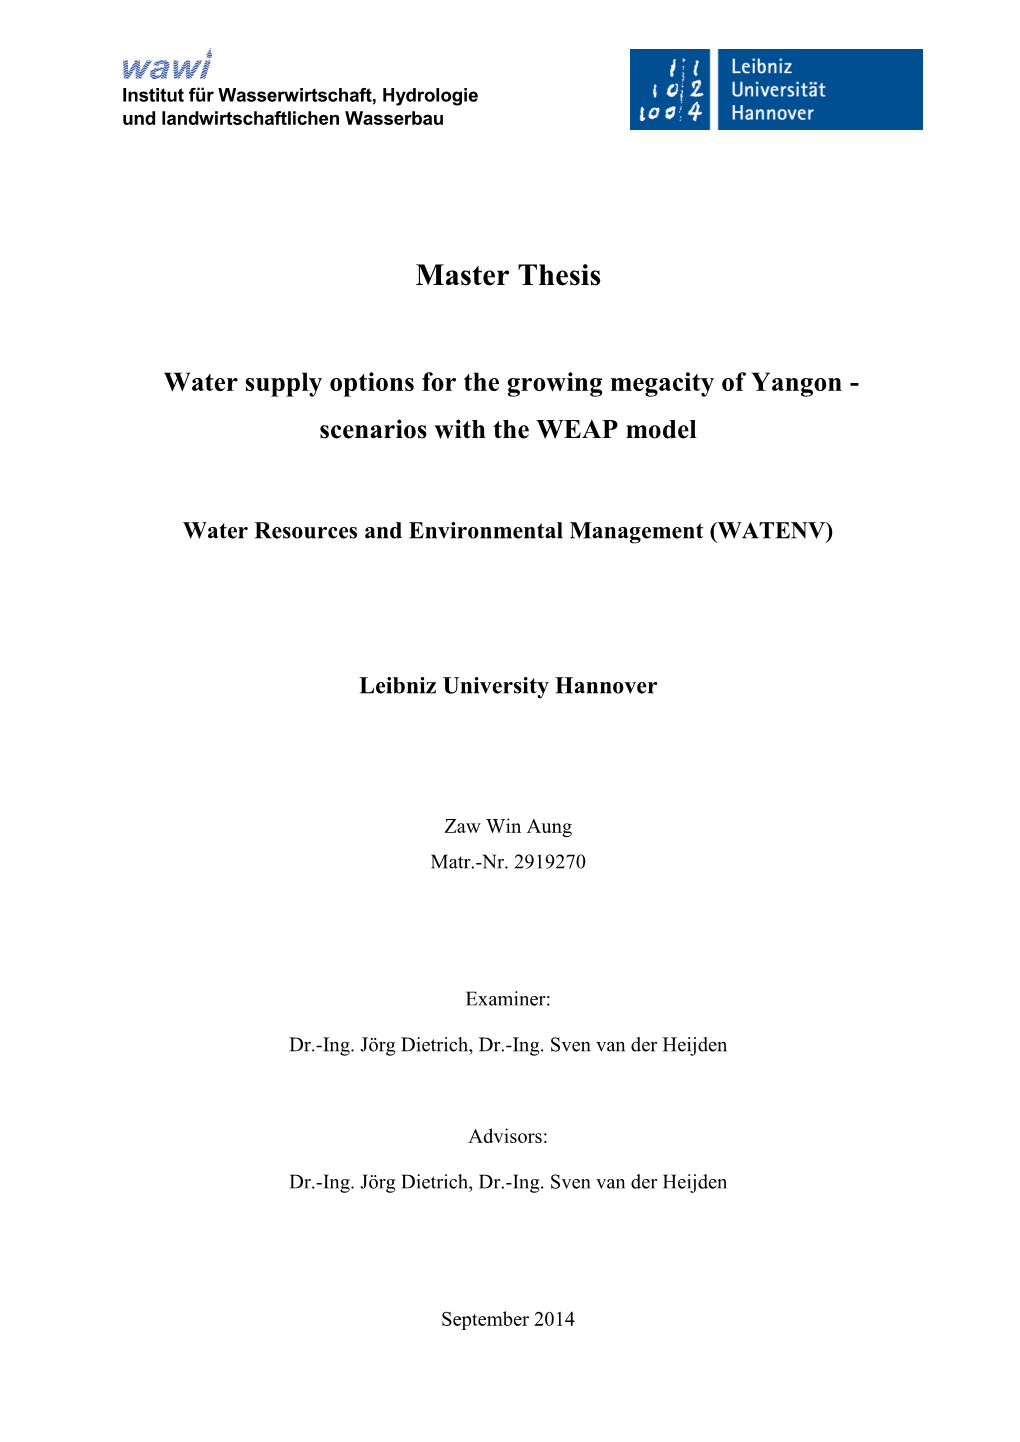 Water Supply Options for the Growing Megacity of Yangon - Scenarios with the WEAP Model